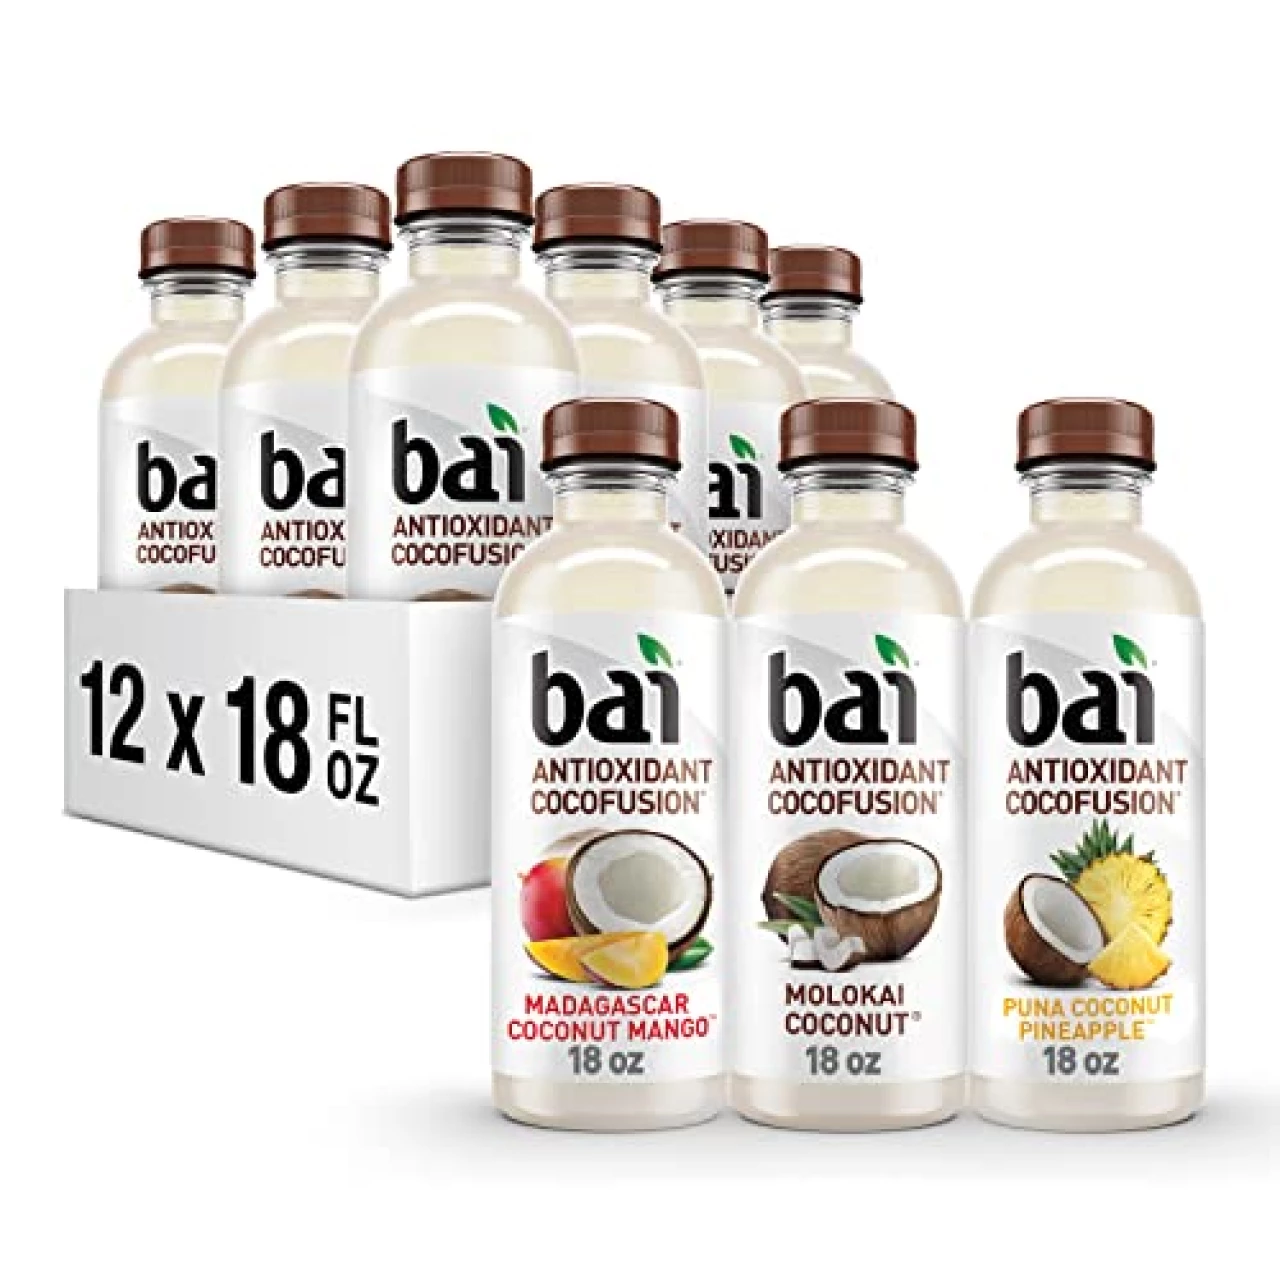 Bai Coconut Flavored Water, Cocofusions Variety Pack III - 6 of Molokai Coconut, 3 each of Madagascar Coconut Mango, Puna Coconut Pineapple (Assorted Flavors)18 Fl Oz (Pack of 12)